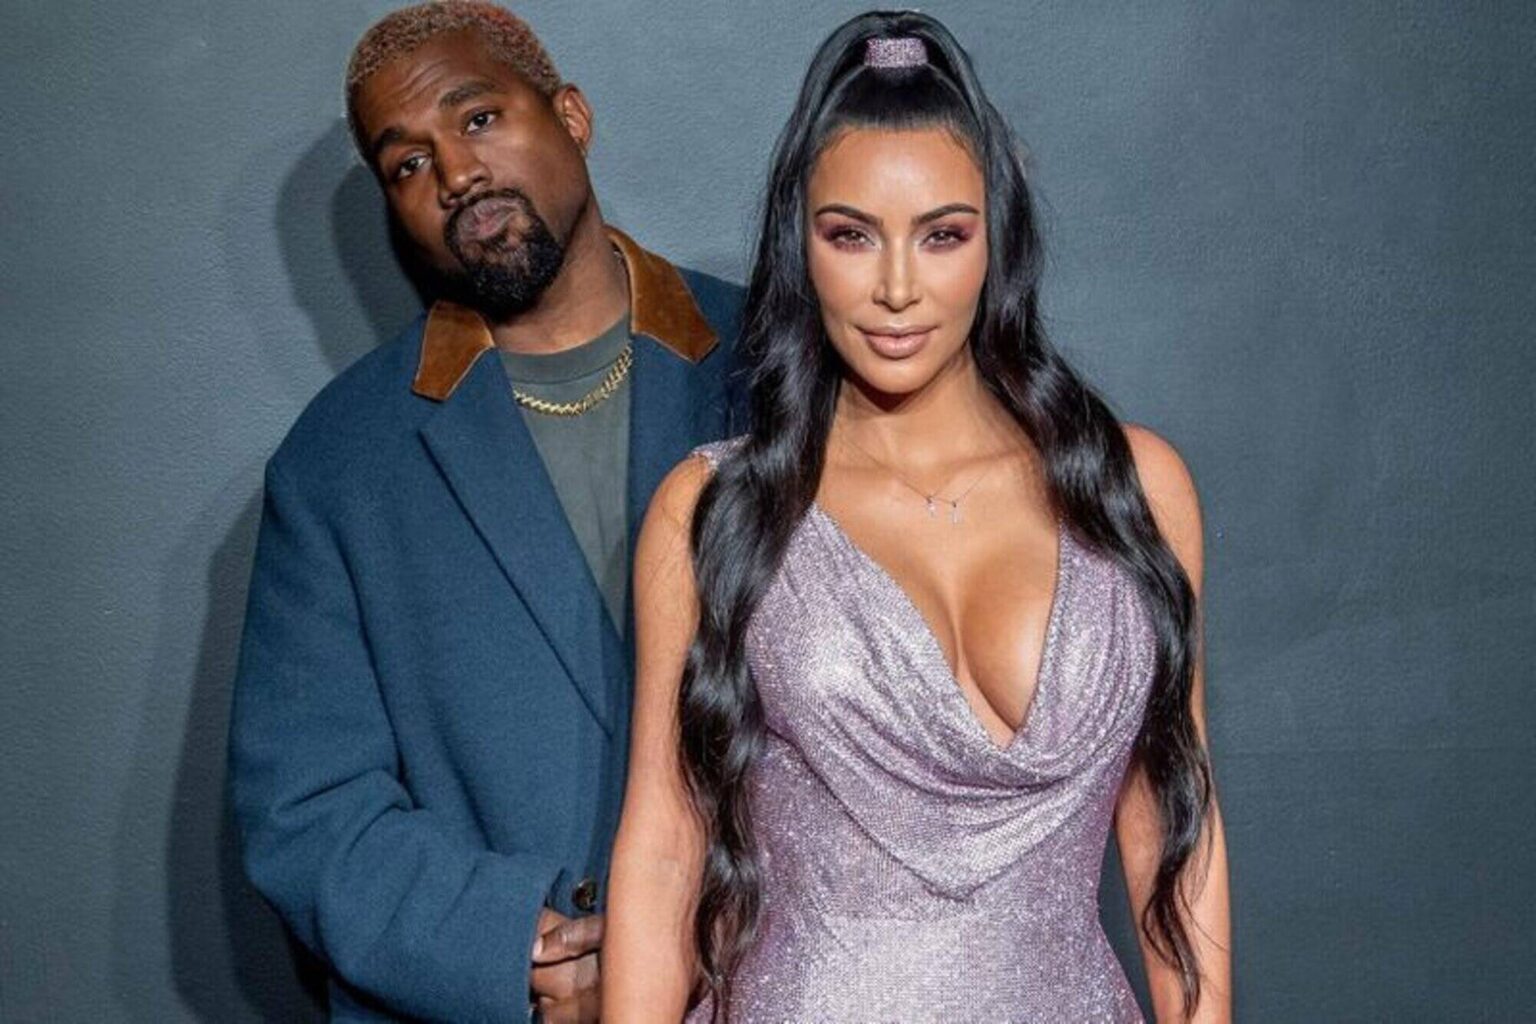 Kim Kardashian and Kanye West's divorce is far from clean, but one rumor in particular is extra messy. Read on why people think Kanye West might be gay.